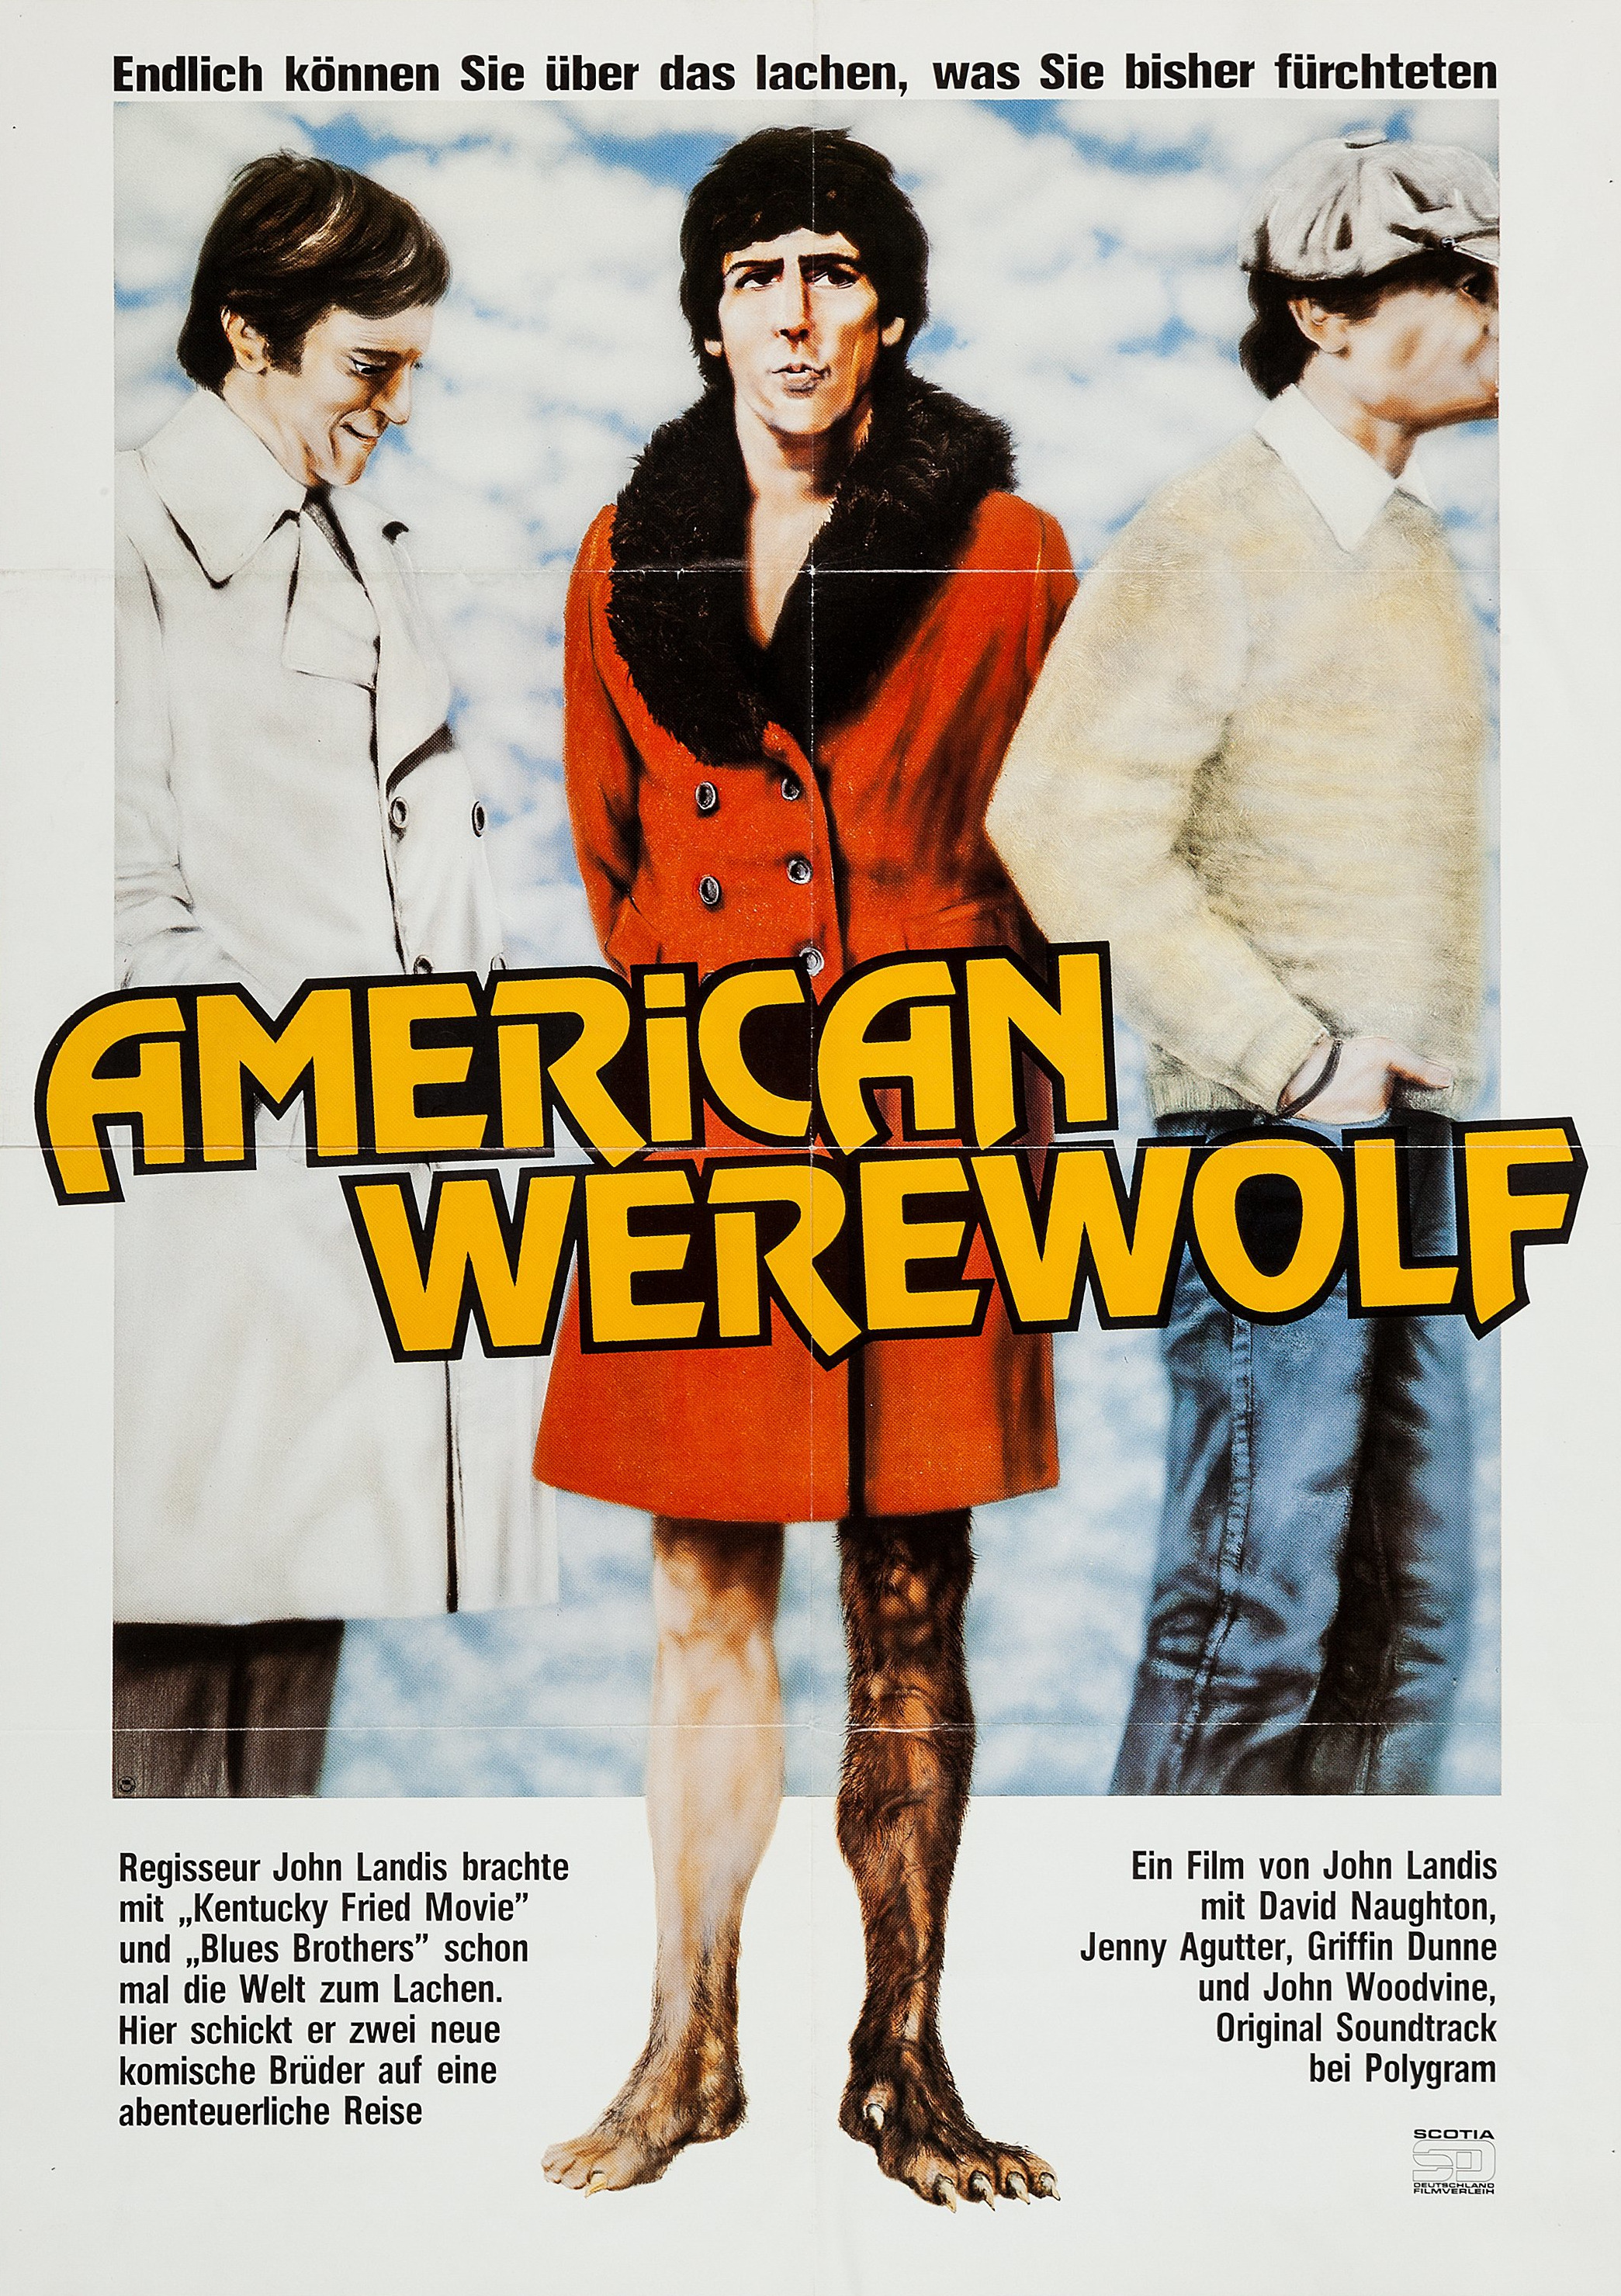 Mega Sized Movie Poster Image for An American Werewolf in London (#10 of 10)